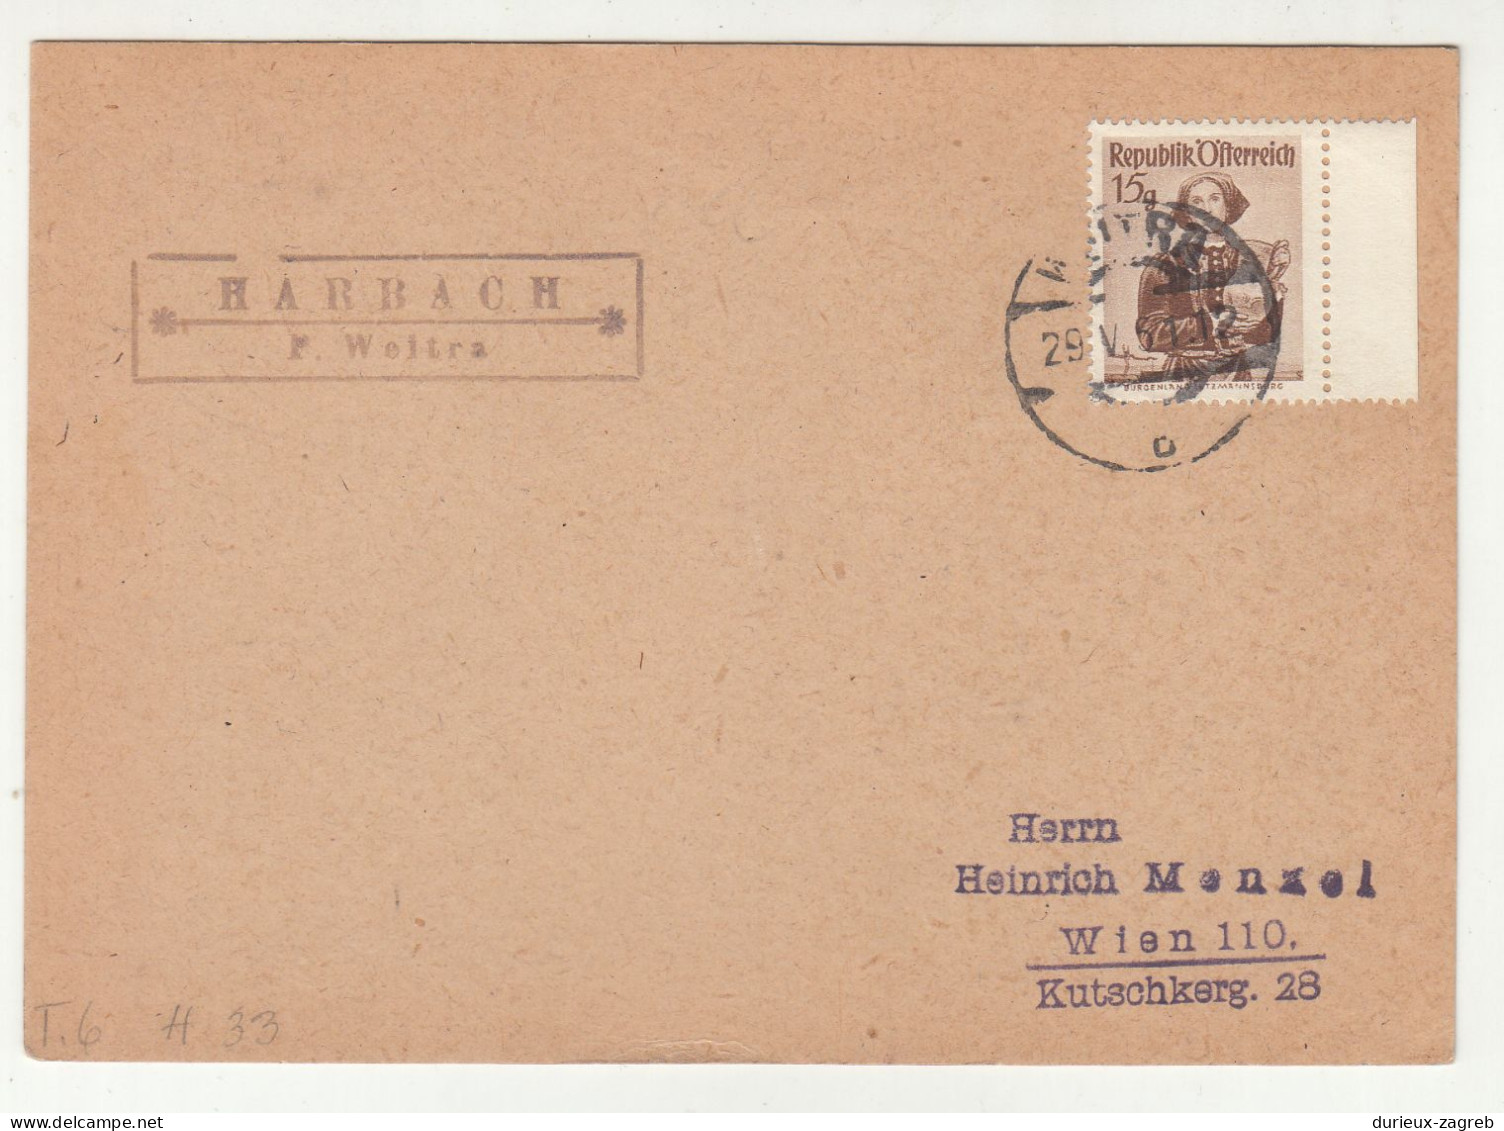 Harbach P. Weitra Mark On Card Posted? 1961 B240401 - Briefe U. Dokumente